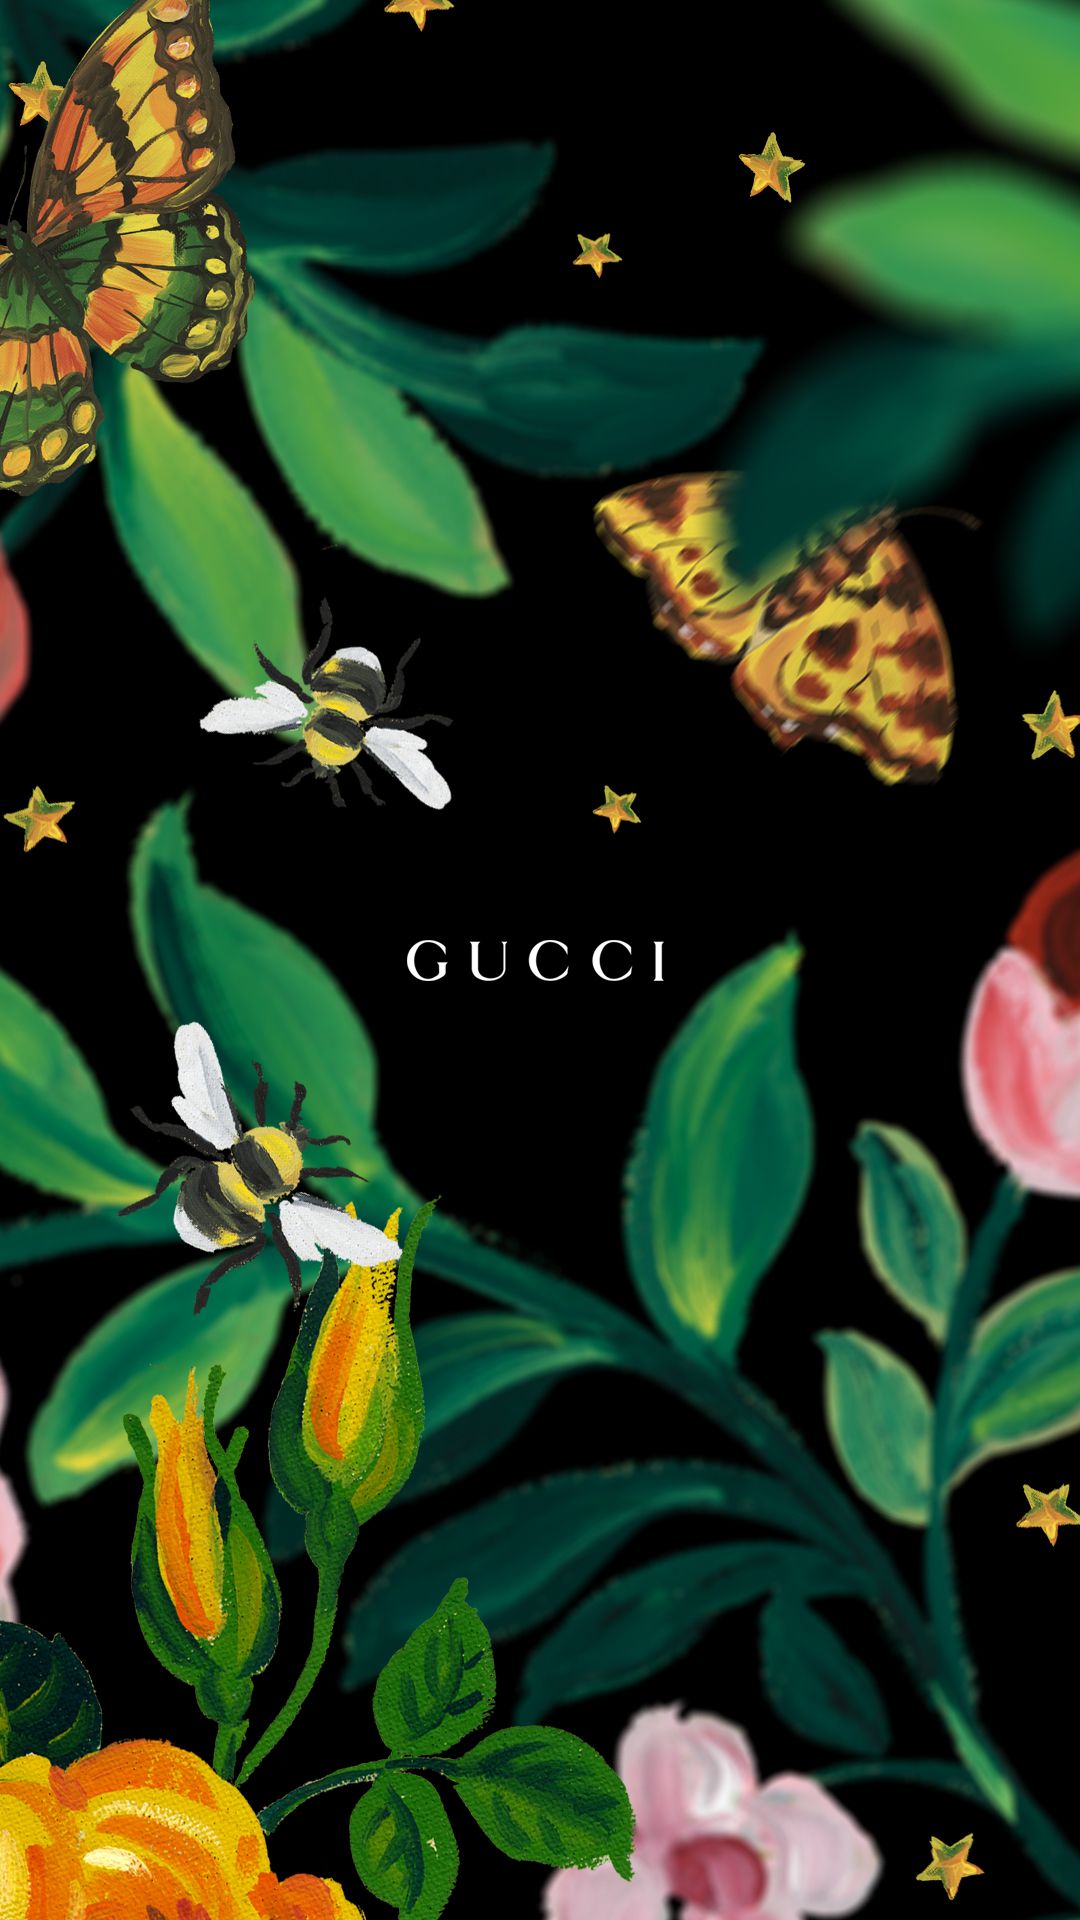 lbcloomis HD New Supreme Cool Gucci iPhone Wallpapers Free Download